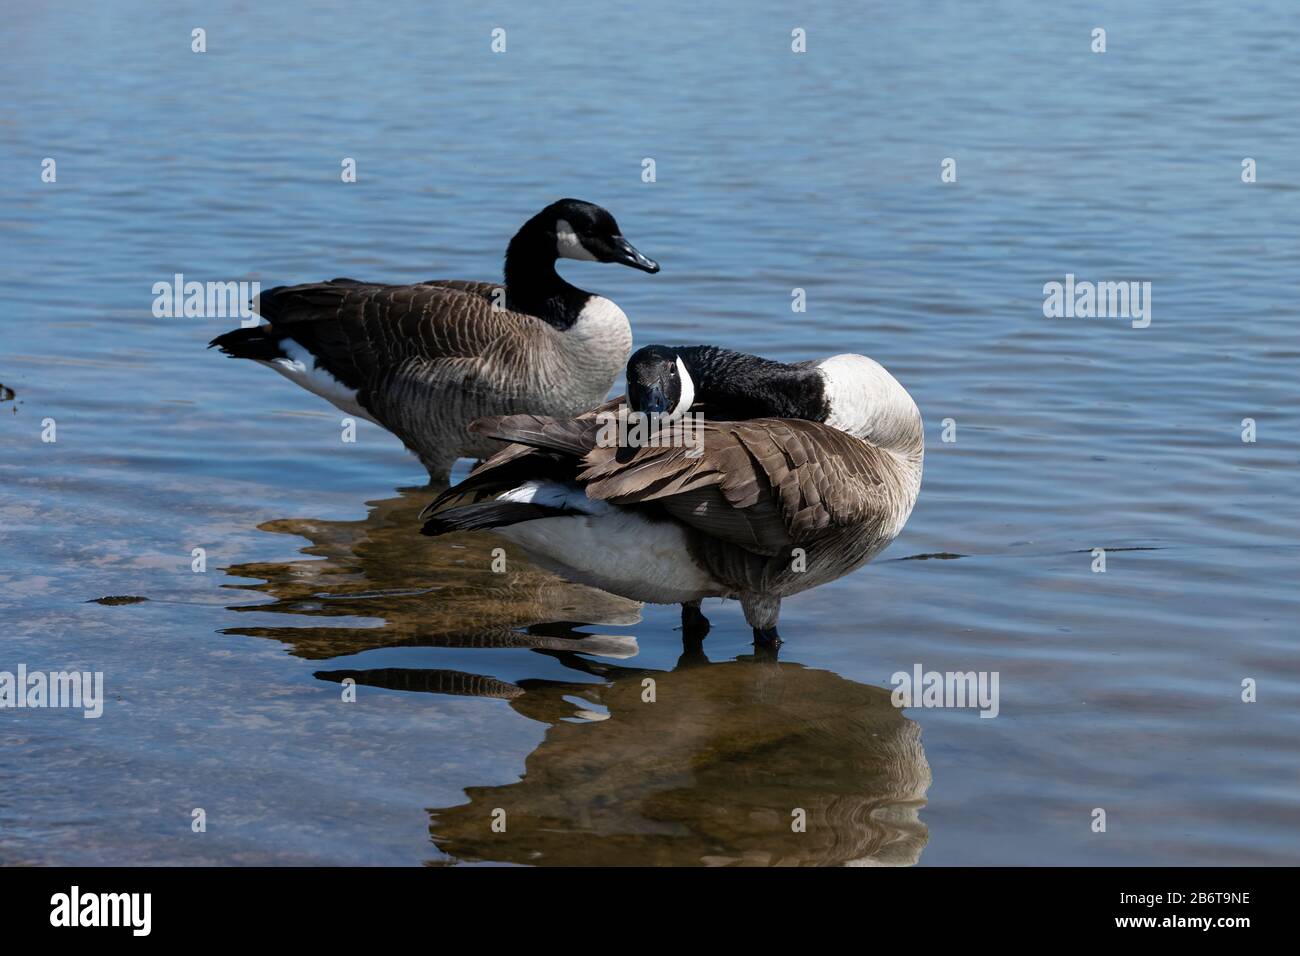 A pair of Canadian Geese standing in some shallow water while one stretches its head across its back as it cleans its wing feathers. Stock Photo